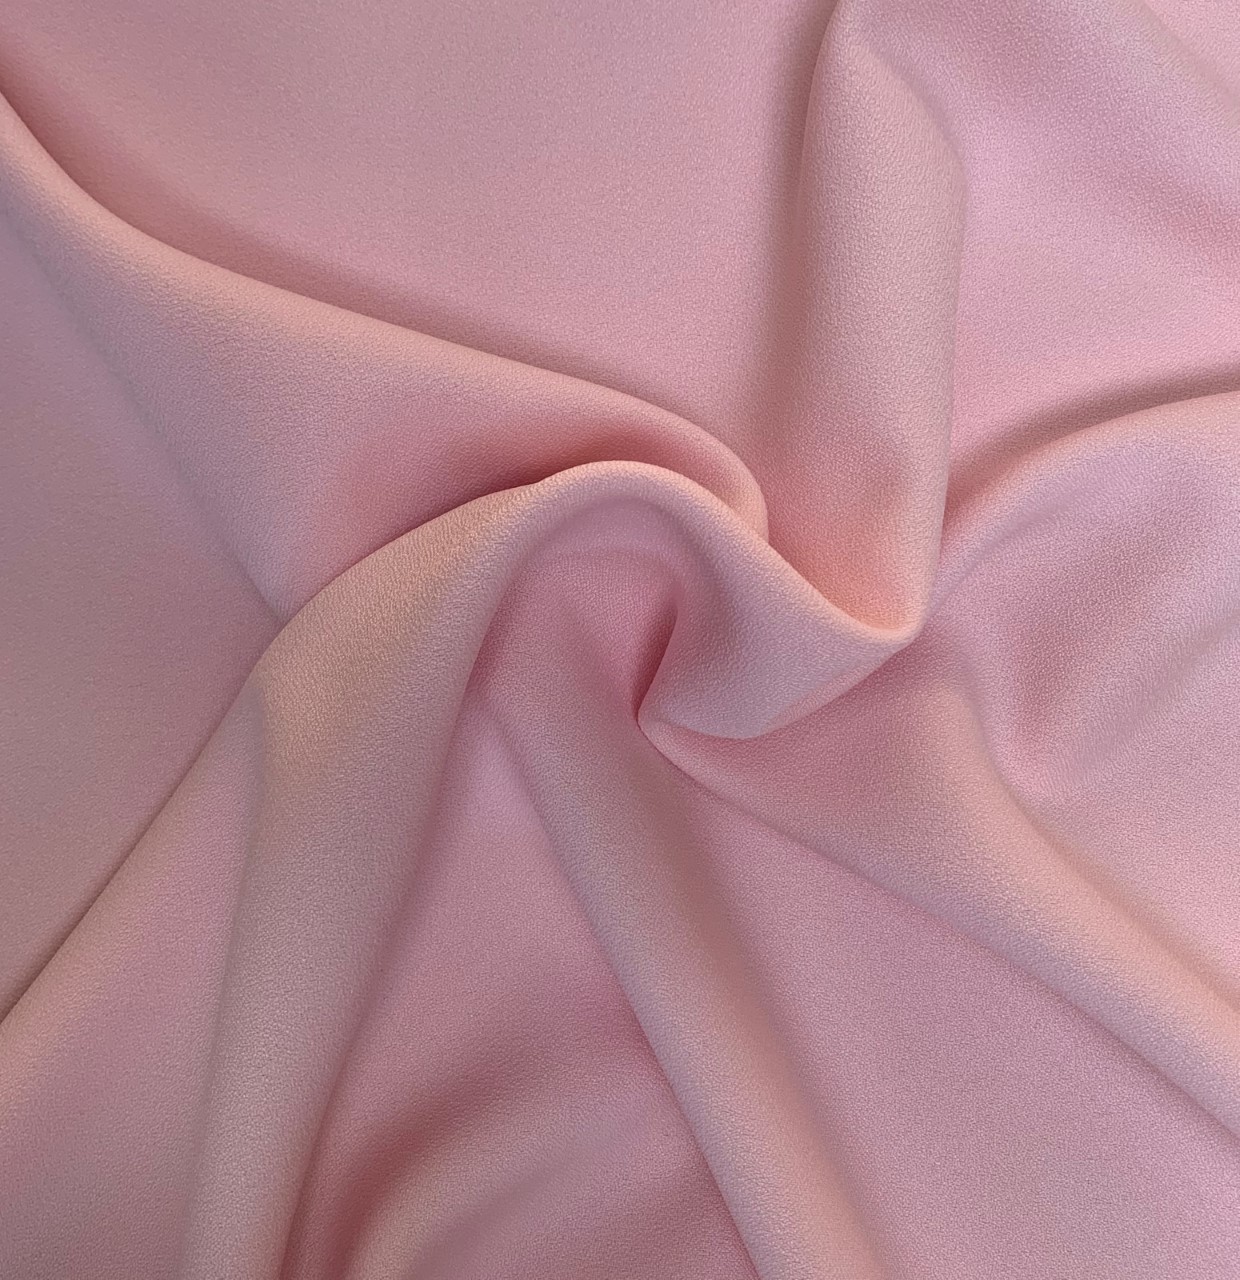 60" Wide Pink Crepe -By the yard (100% Polyester)